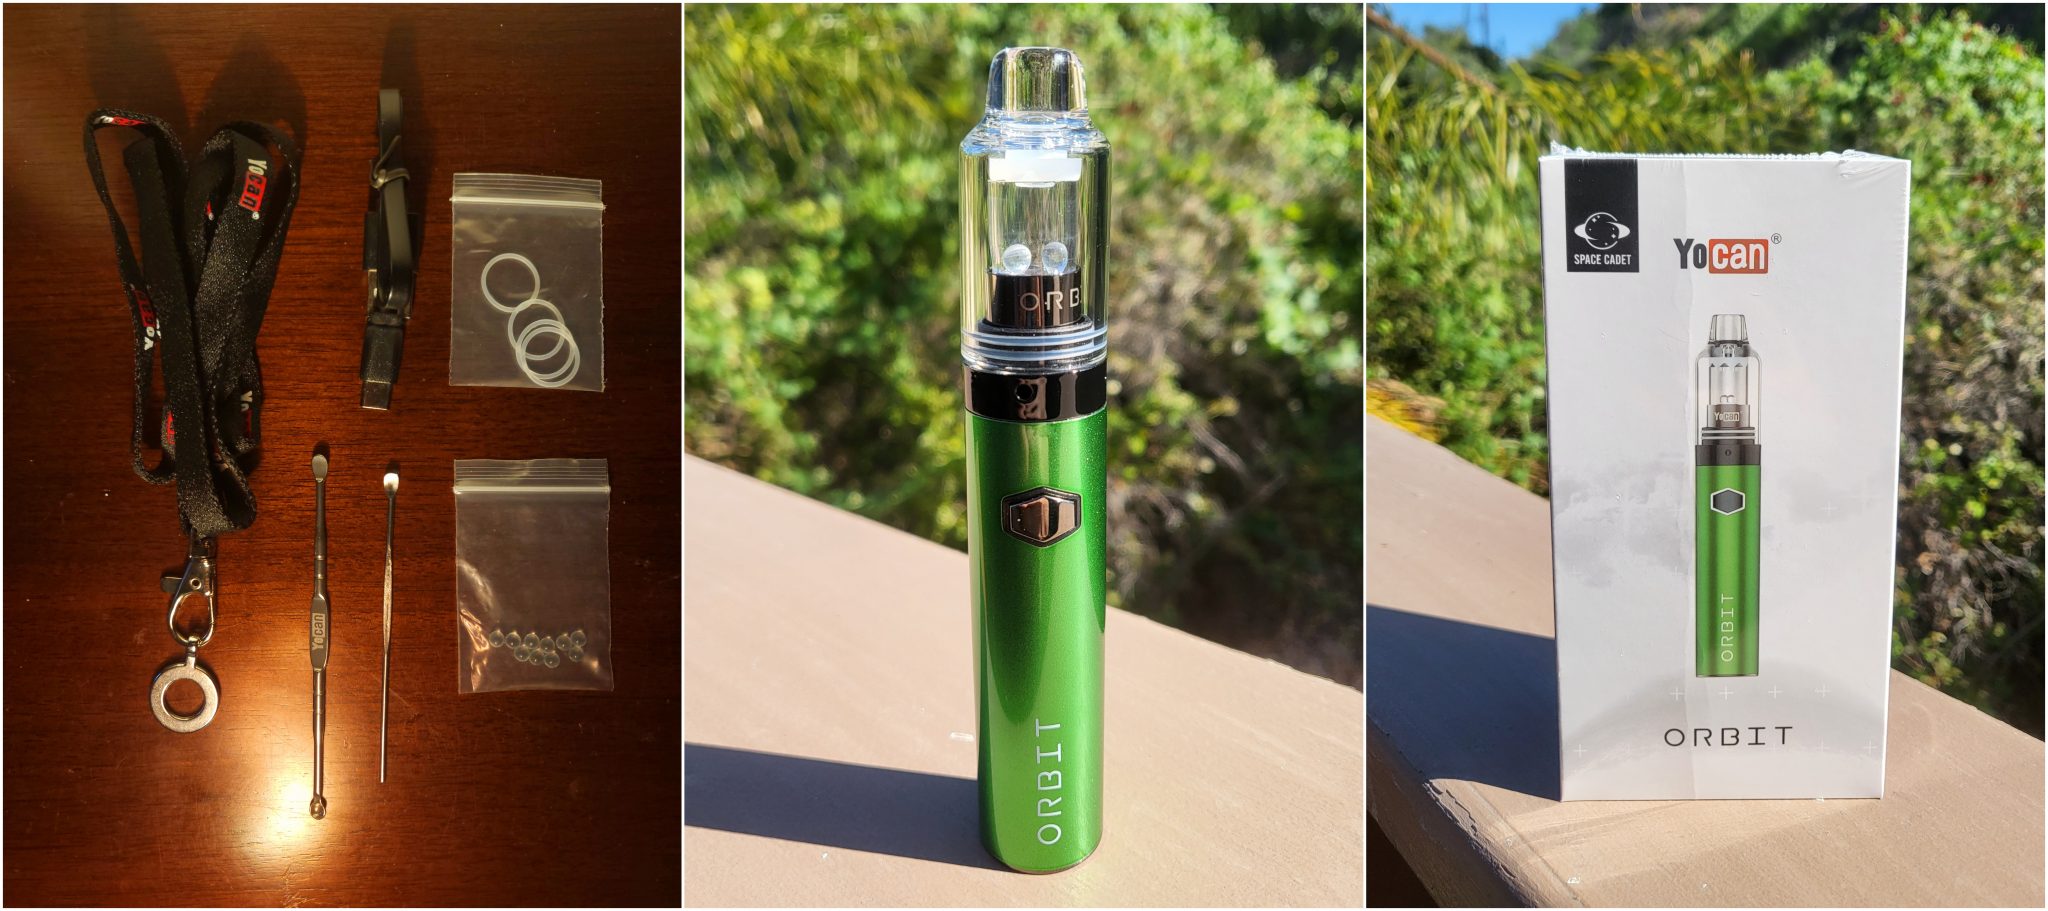 Yocan Orbit Review - Cutting-Edge Design and Excellent Airflow